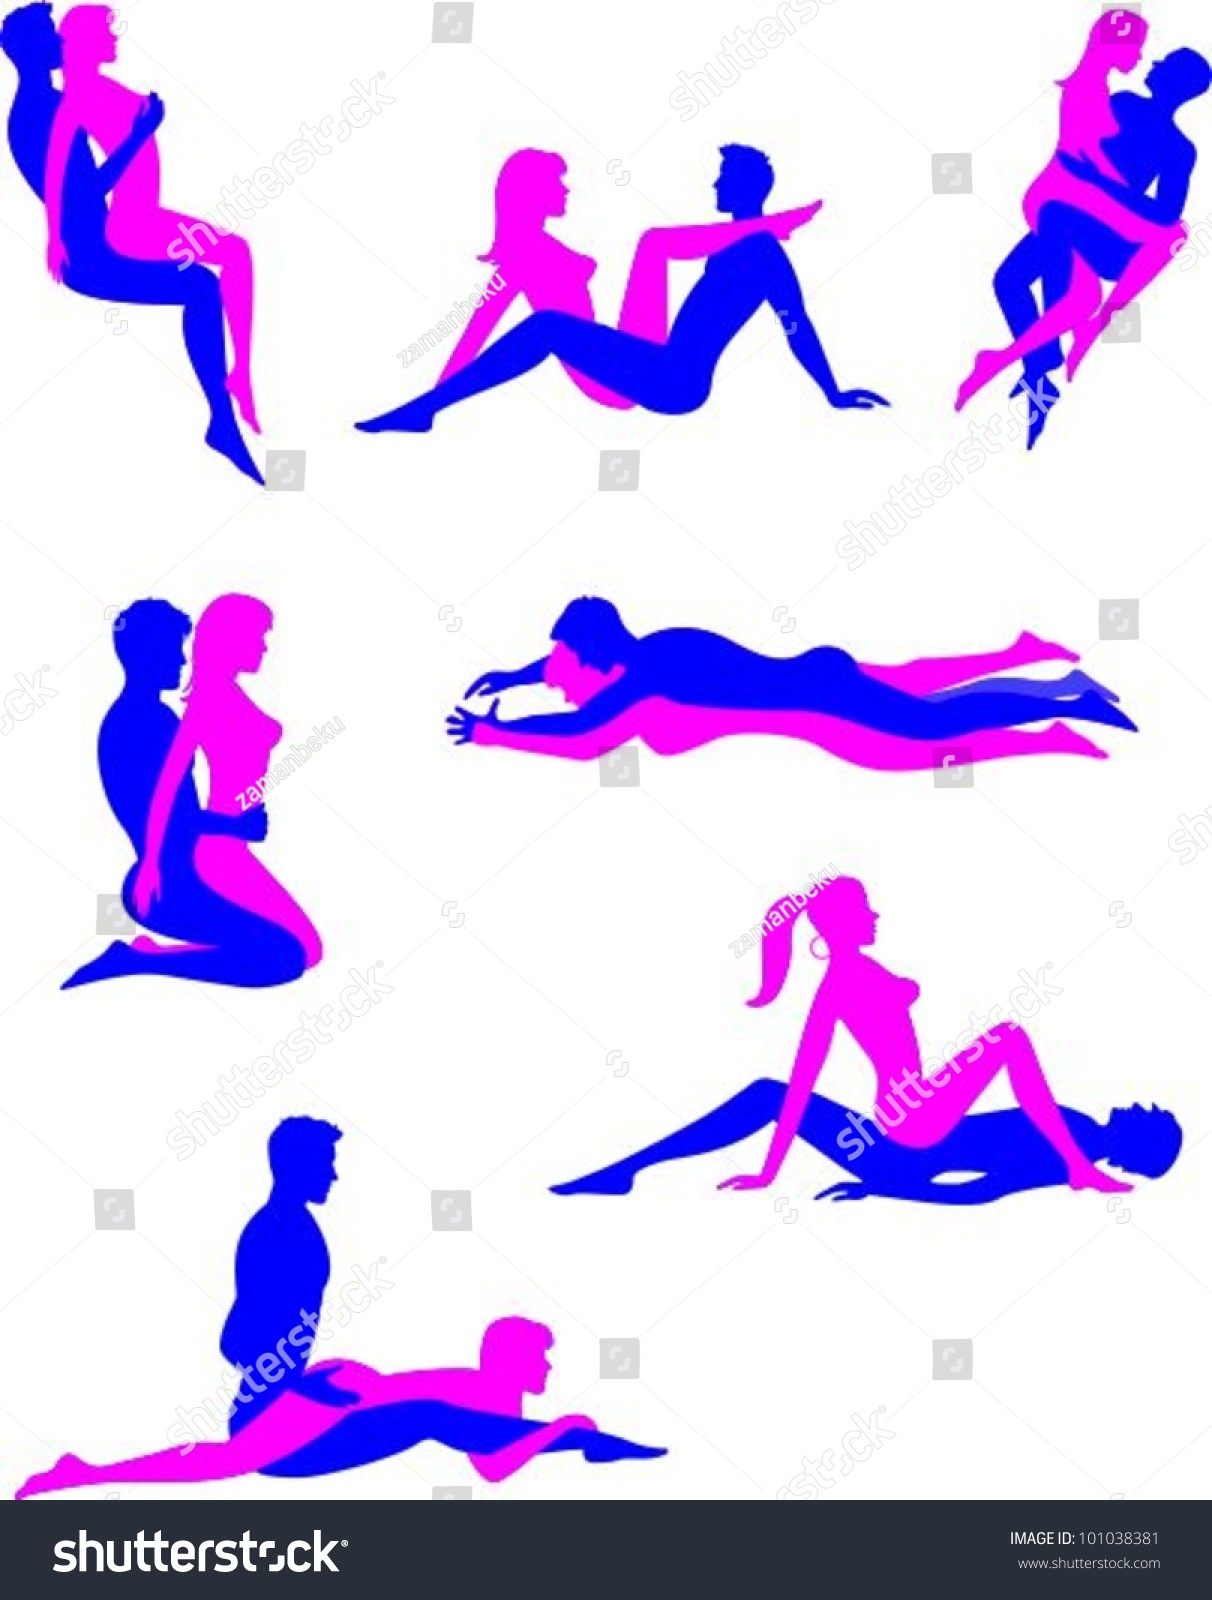 Hd image sex position 10 Different